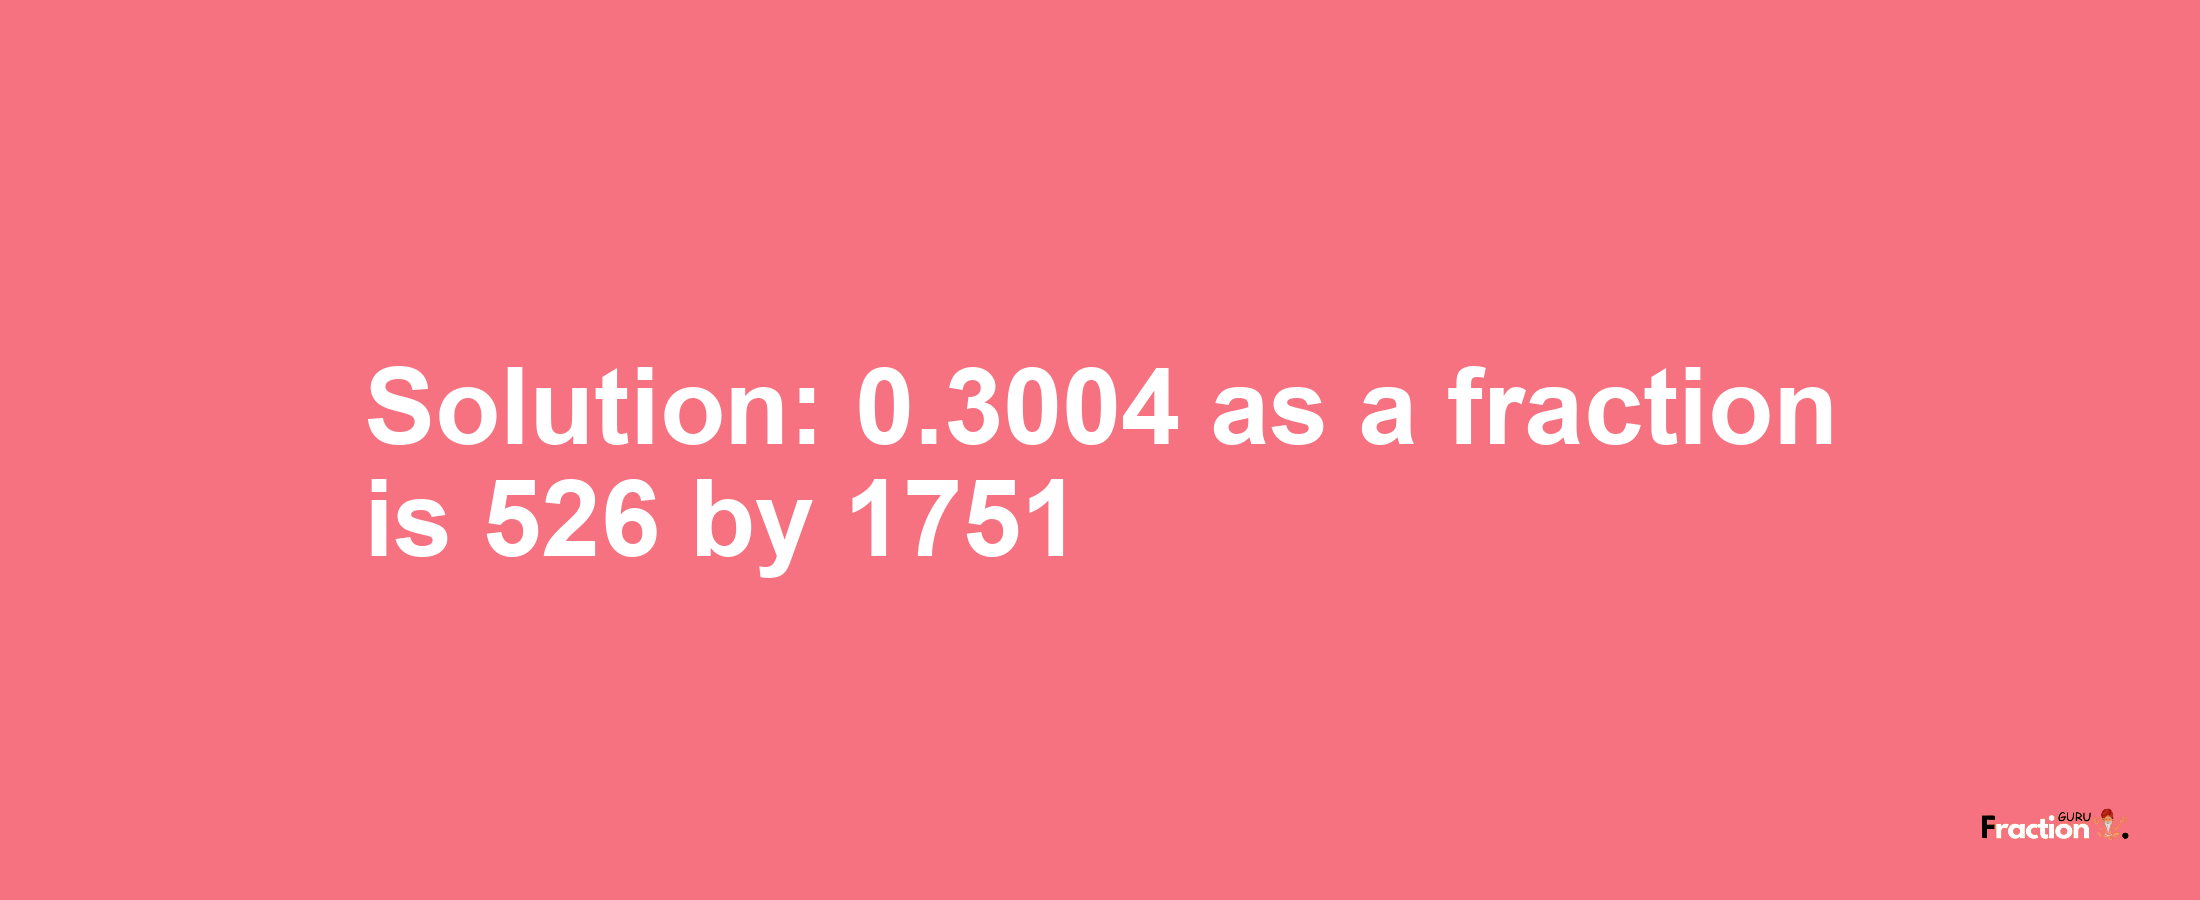 Solution:0.3004 as a fraction is 526/1751